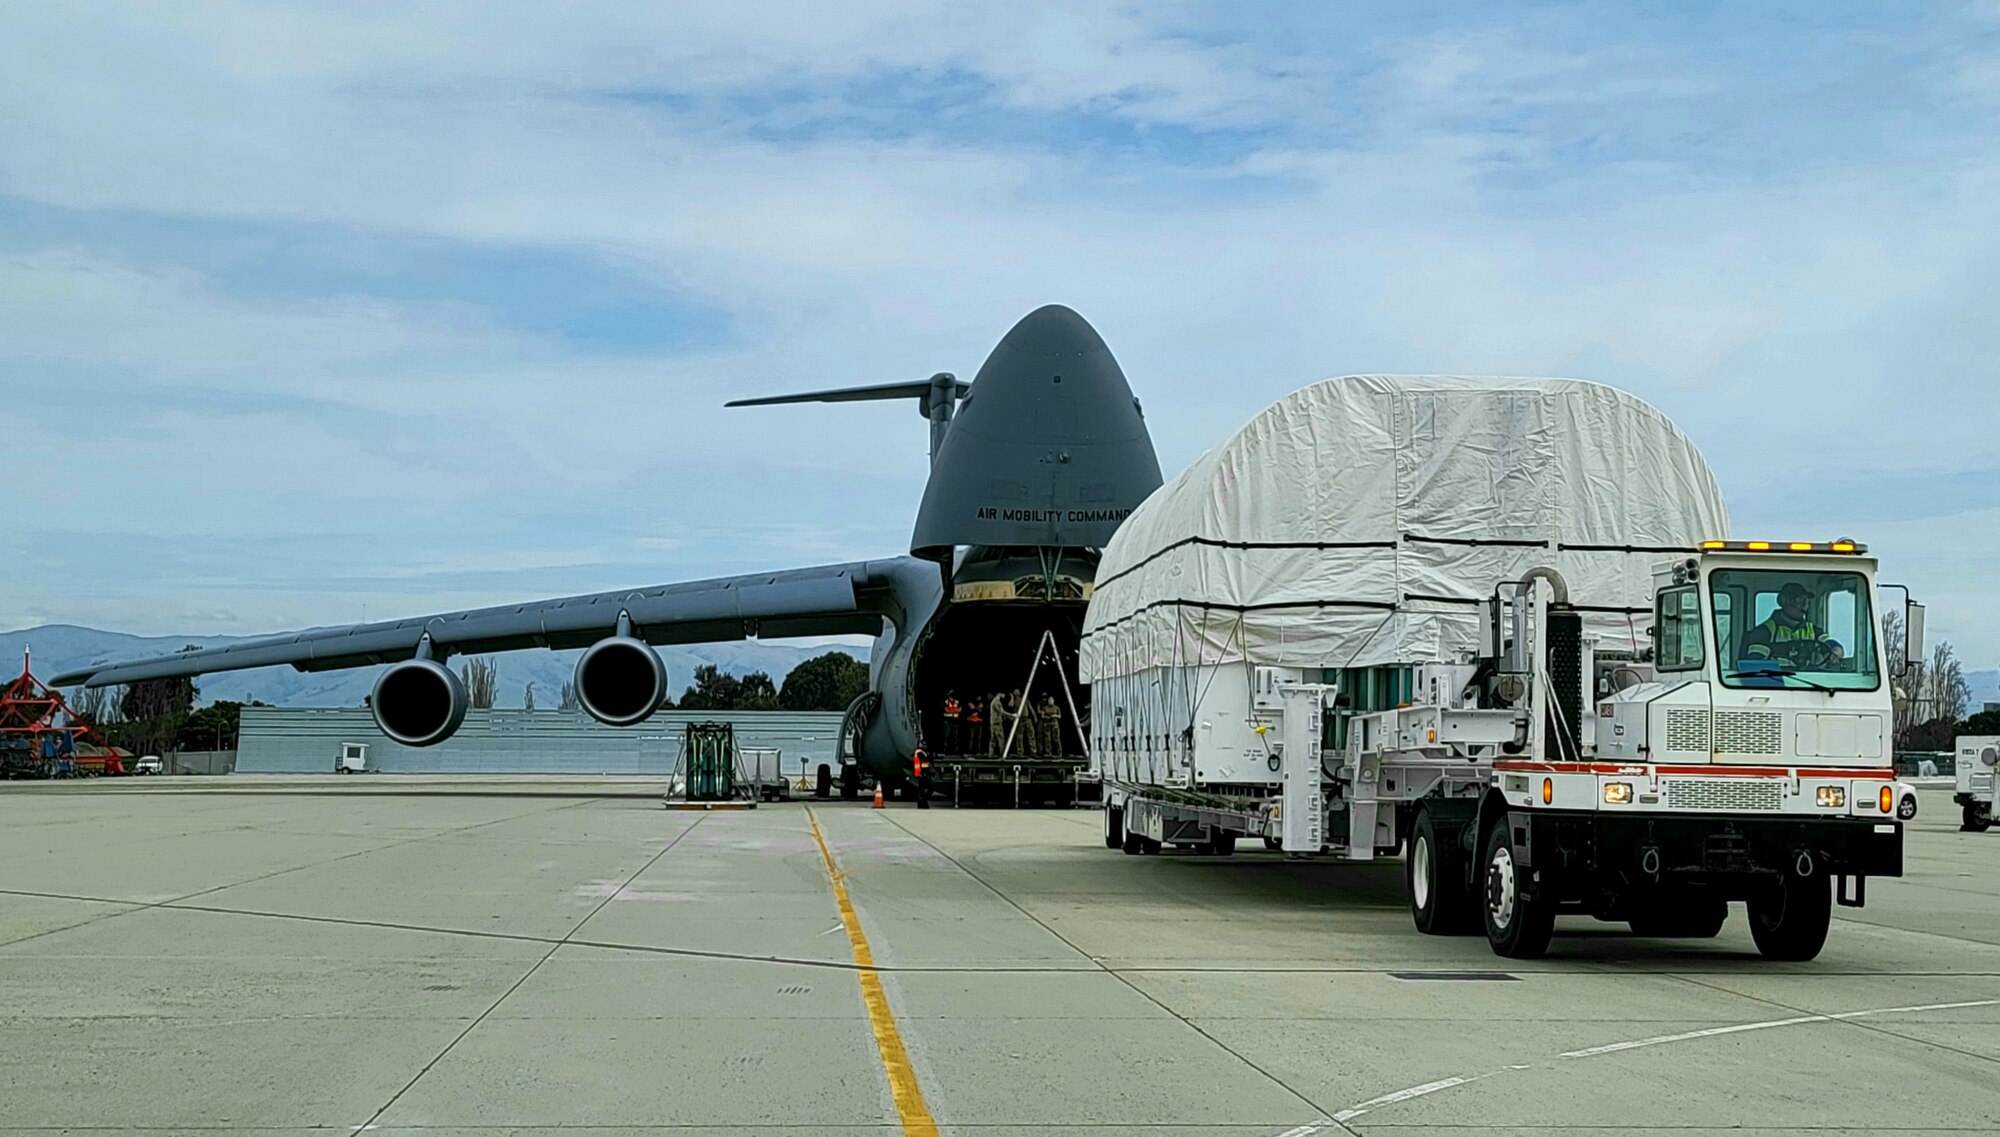 A C-5M Super Galaxy crew from the 60th Air Mobility Wing, Travis Air Force Base, Calif., prepares to front load the SBIRS GEO 5 satellite into the plane’s cargo hold, at Moffett Airfield, Calif., March 17, 2021. The satellite traveled across the country from the Lockheed Martin Space Systems Center satellite integration facility in Sunnyvale, Calif., to the processing facility at Cape Canaveral Space Force Station, Flo. (U.S. Air Force photo by Walter Talens)